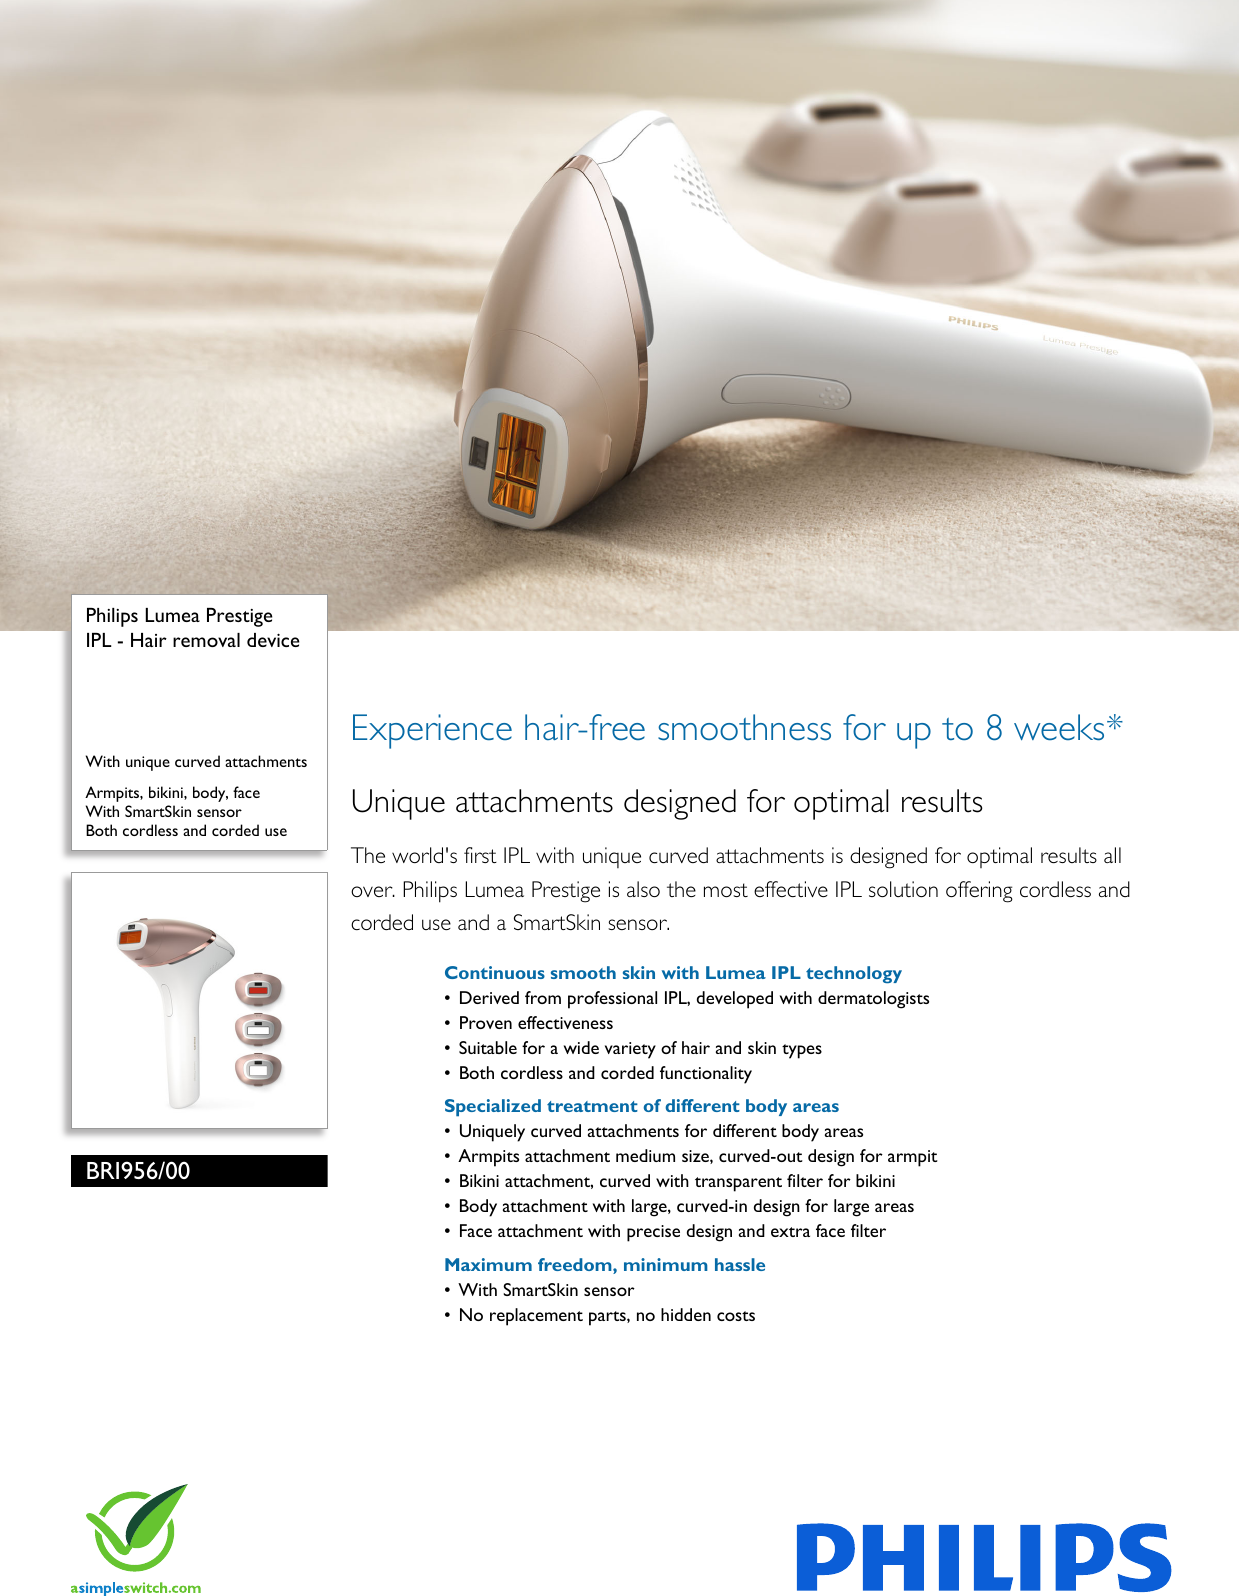 Page 1 of 3 - Philips BRI956/00 IPL - Hair Removal Device Leaflet Bri956 00 Pss Engnz